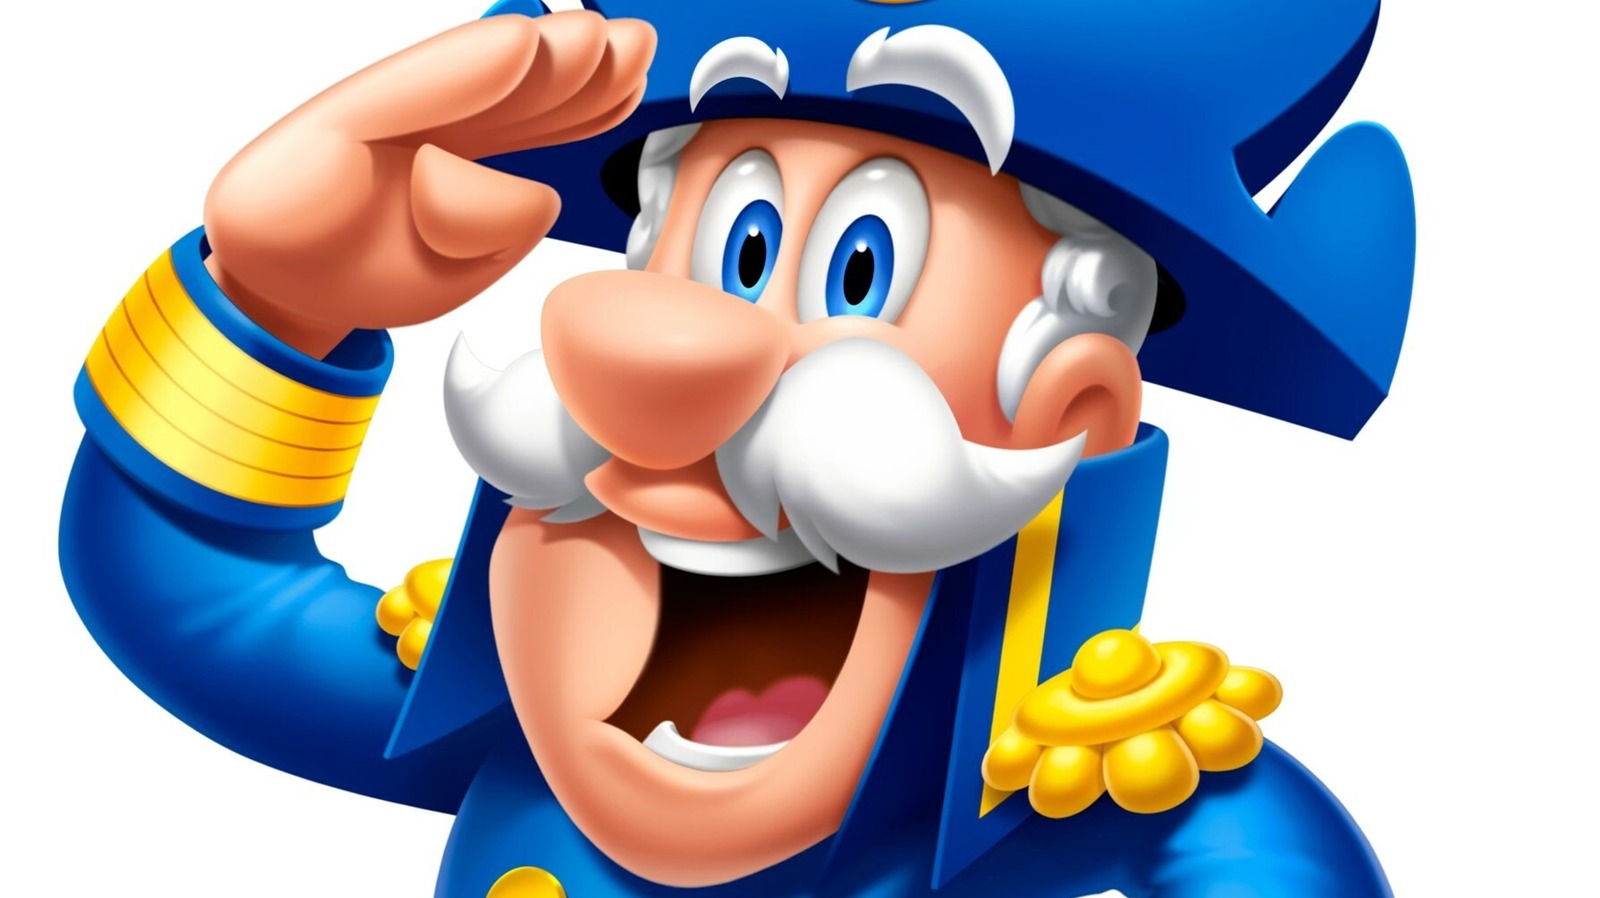 After 60 Years, Cap'n Crunch Has Finally Earned His True Captain's Stripe